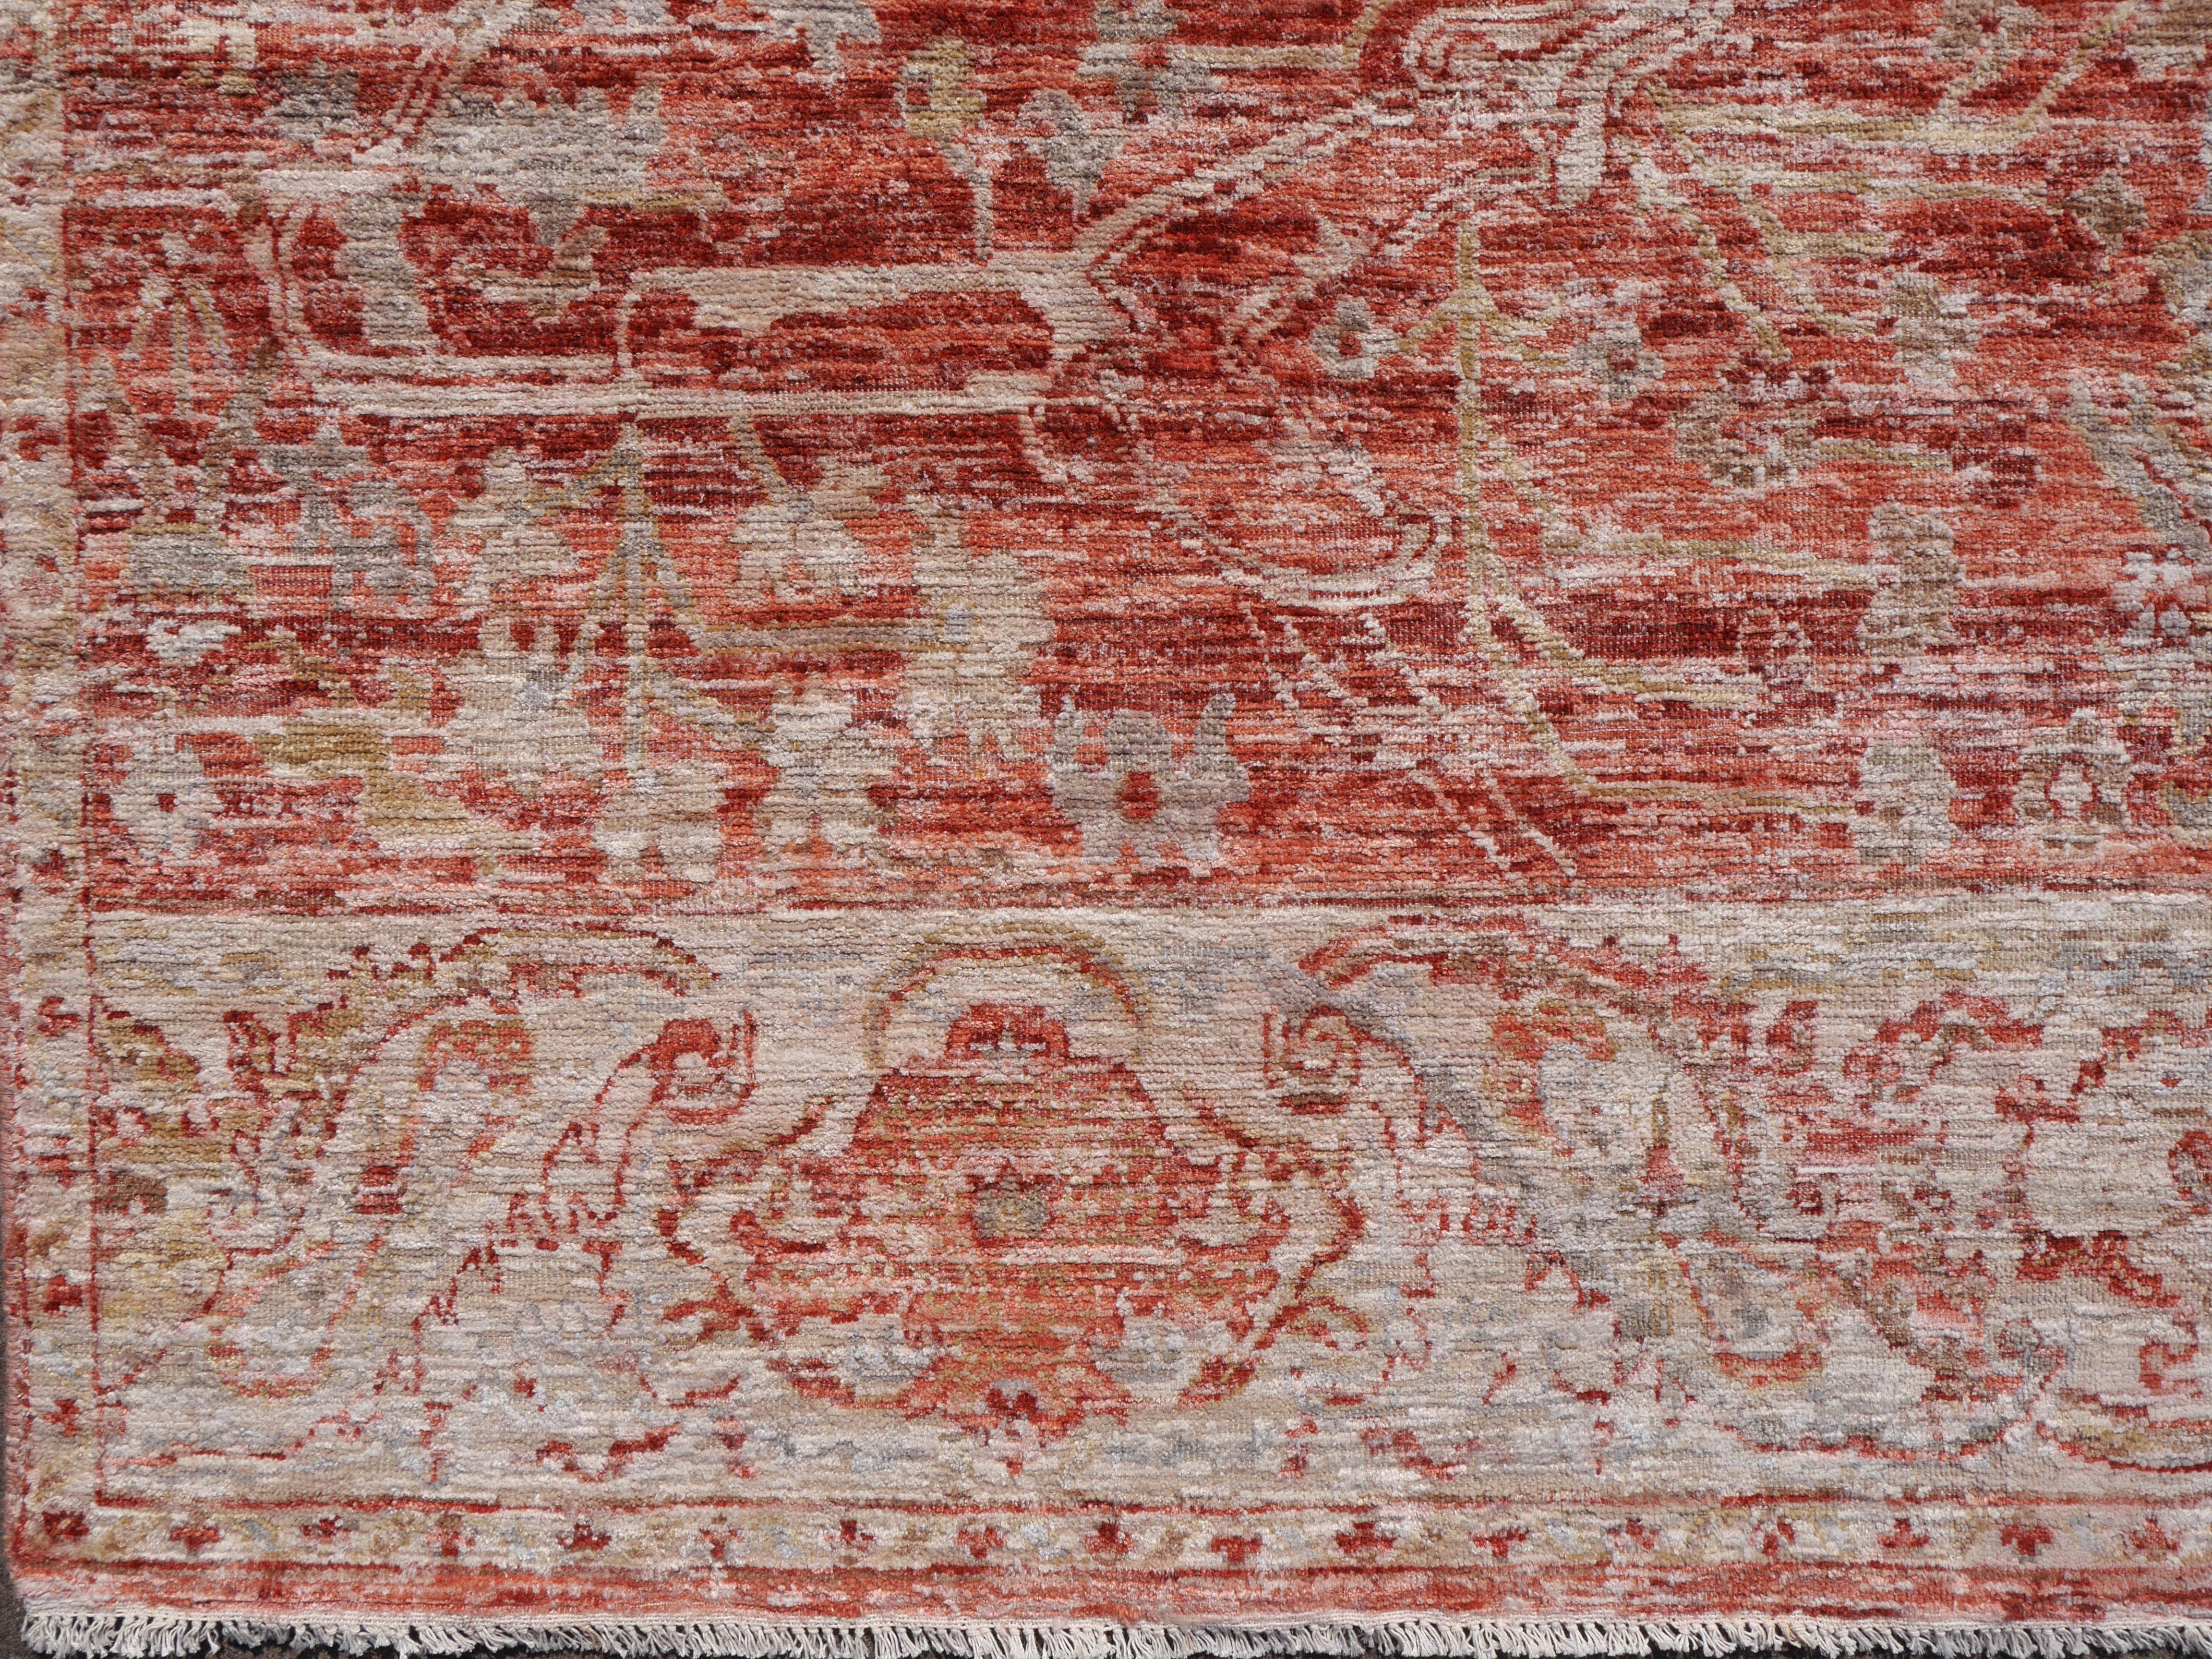 Modern Rug Hand Knotted in Style of Heriz Serapi or Antique Sultanabad 2